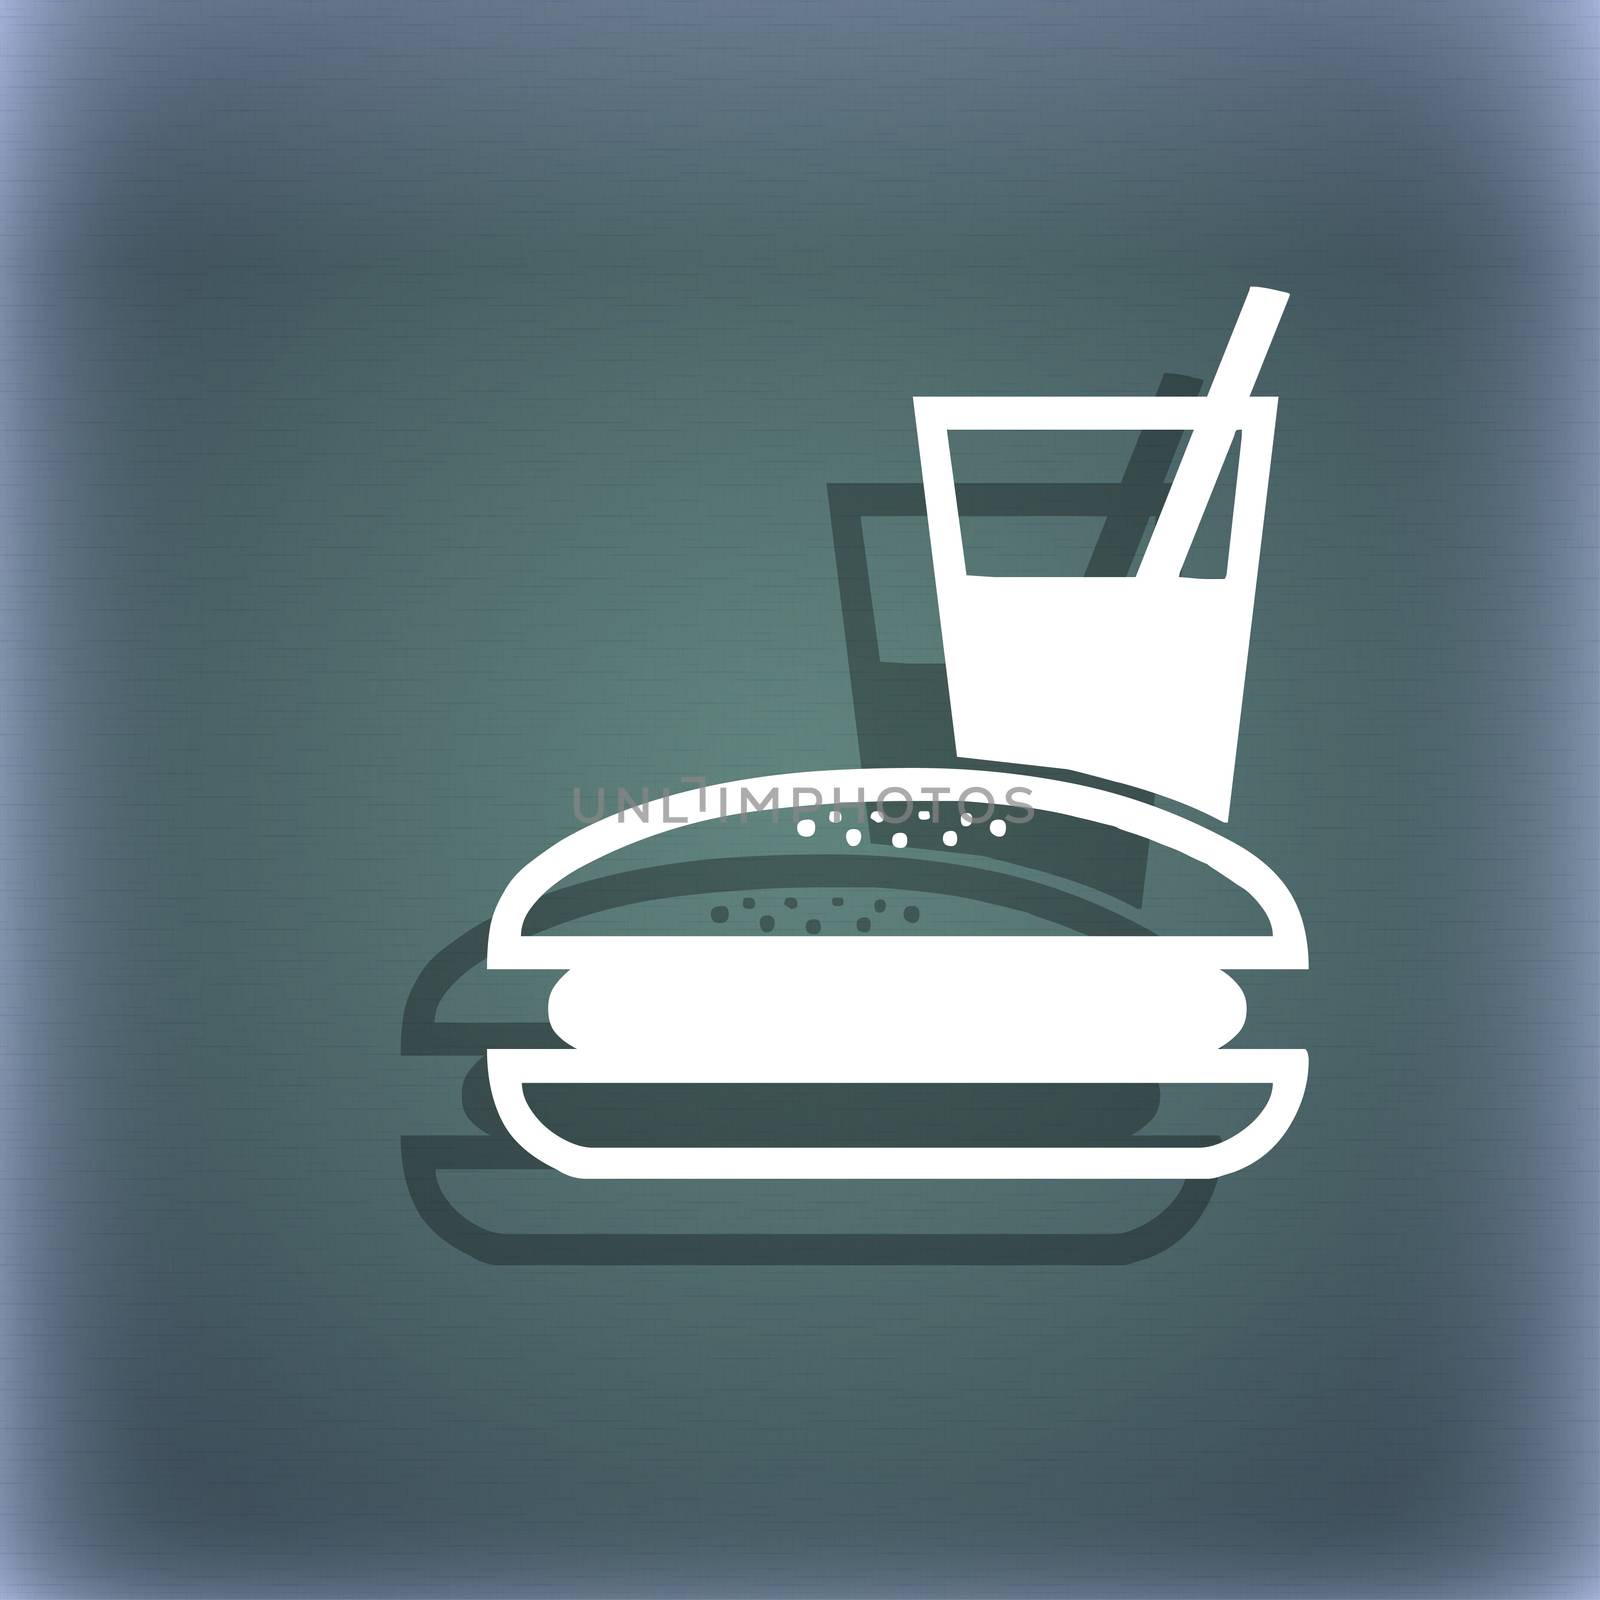 lunch box icon symbol on the blue-green abstract background with shadow and space for your text. illustration